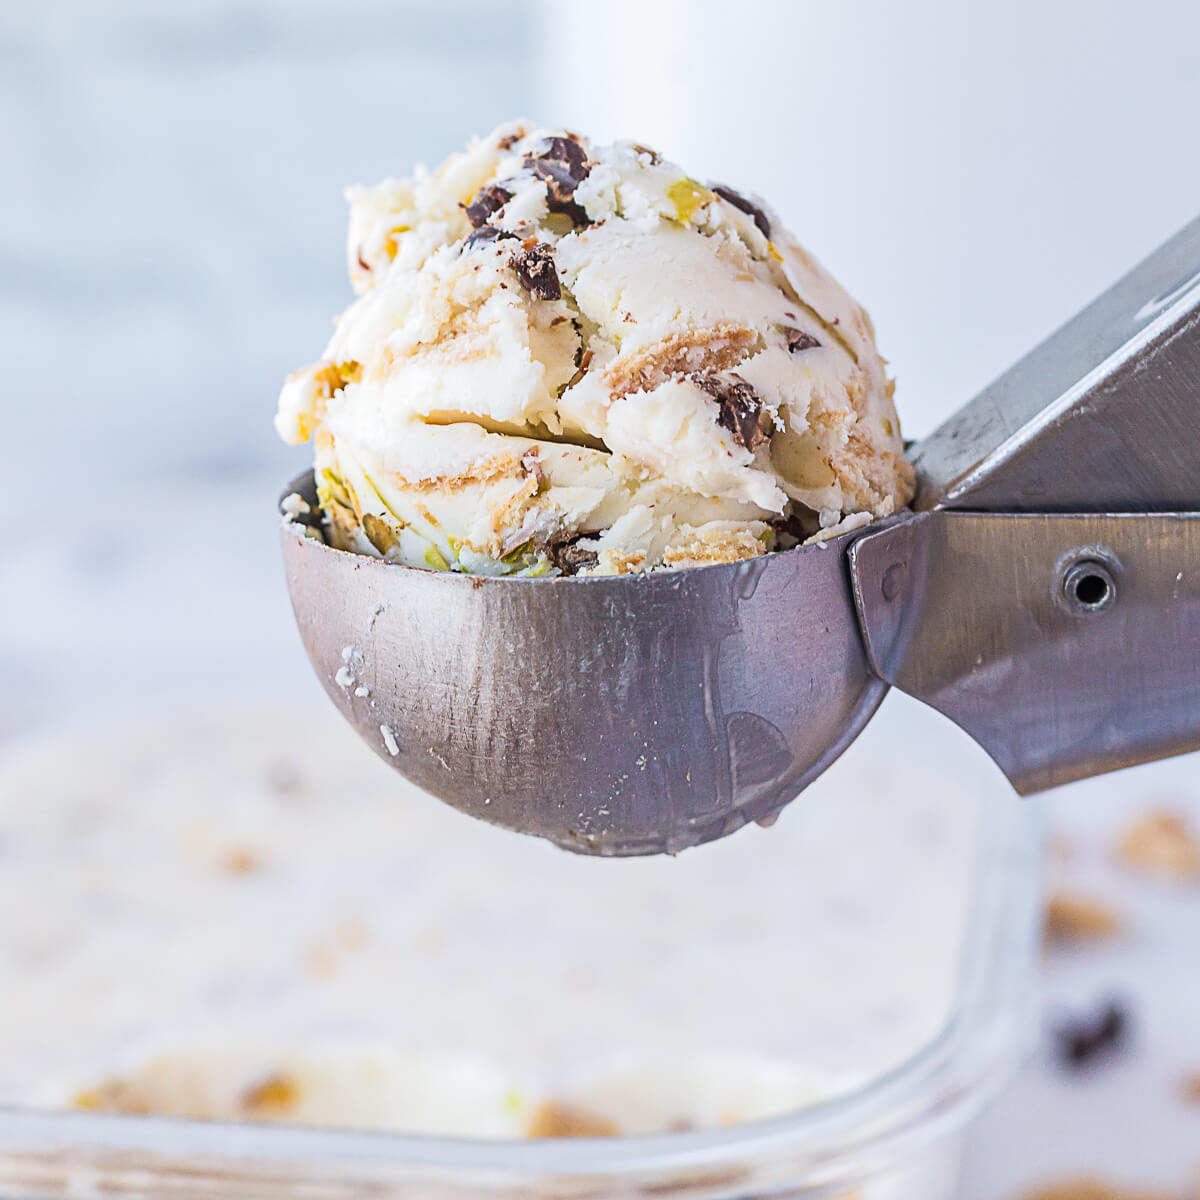 An ice cream scoop full of white vanilla ice cream dotted with chocolate chips, pistachios, and broken sugar cone bits.